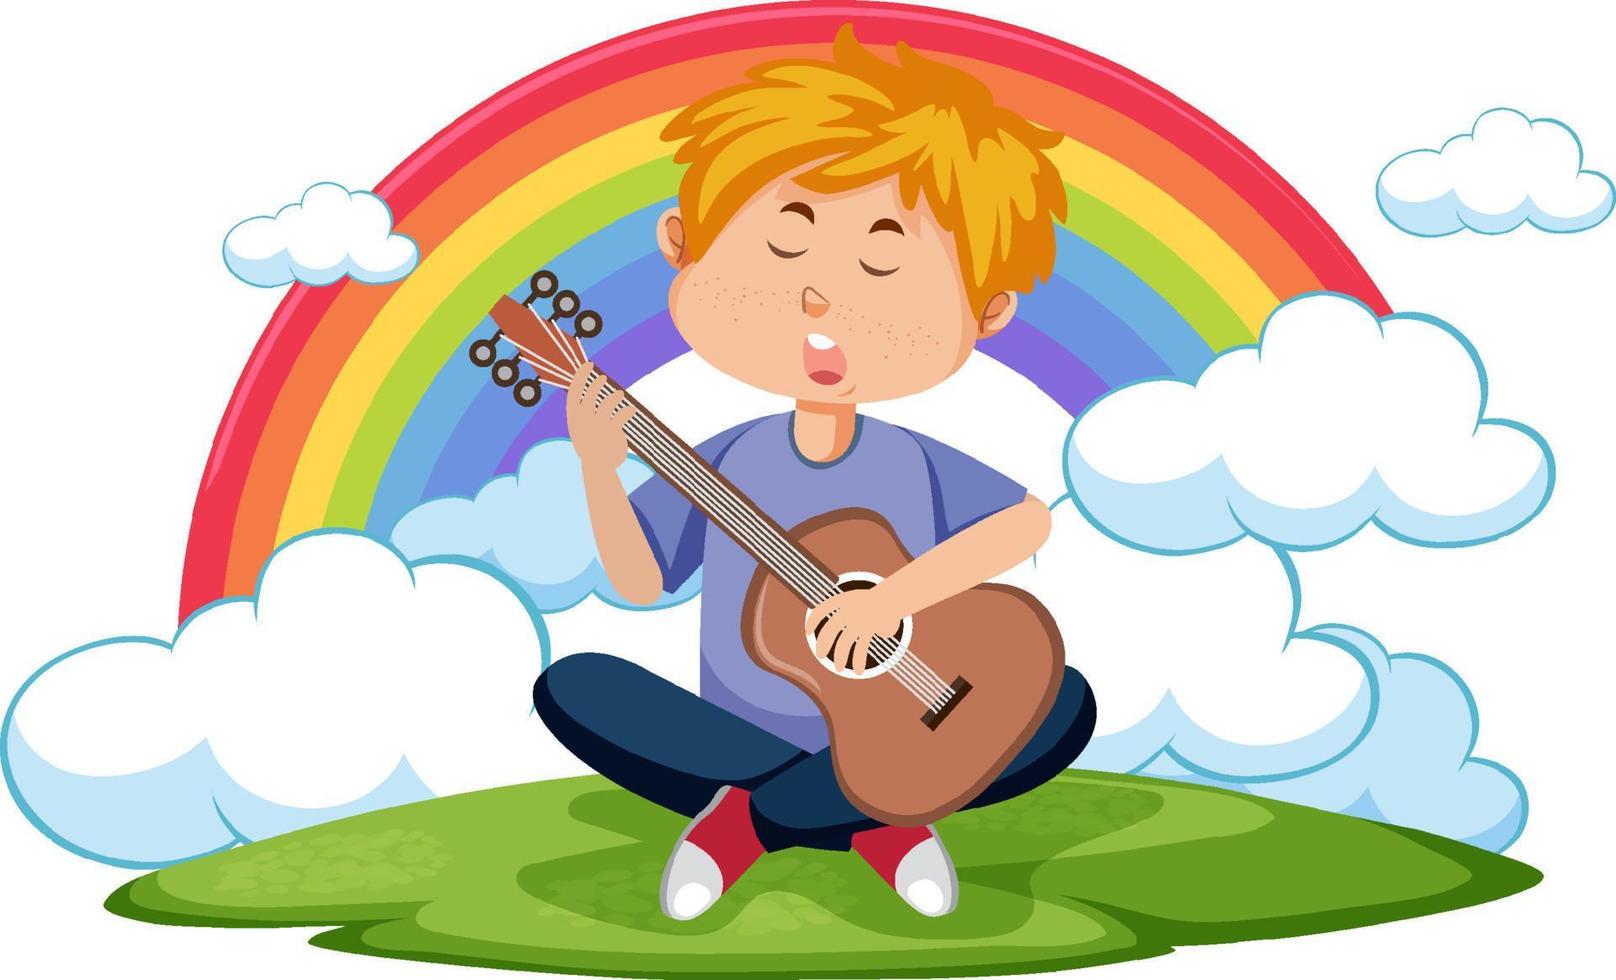 A boy playing guitar with rainbow background vector